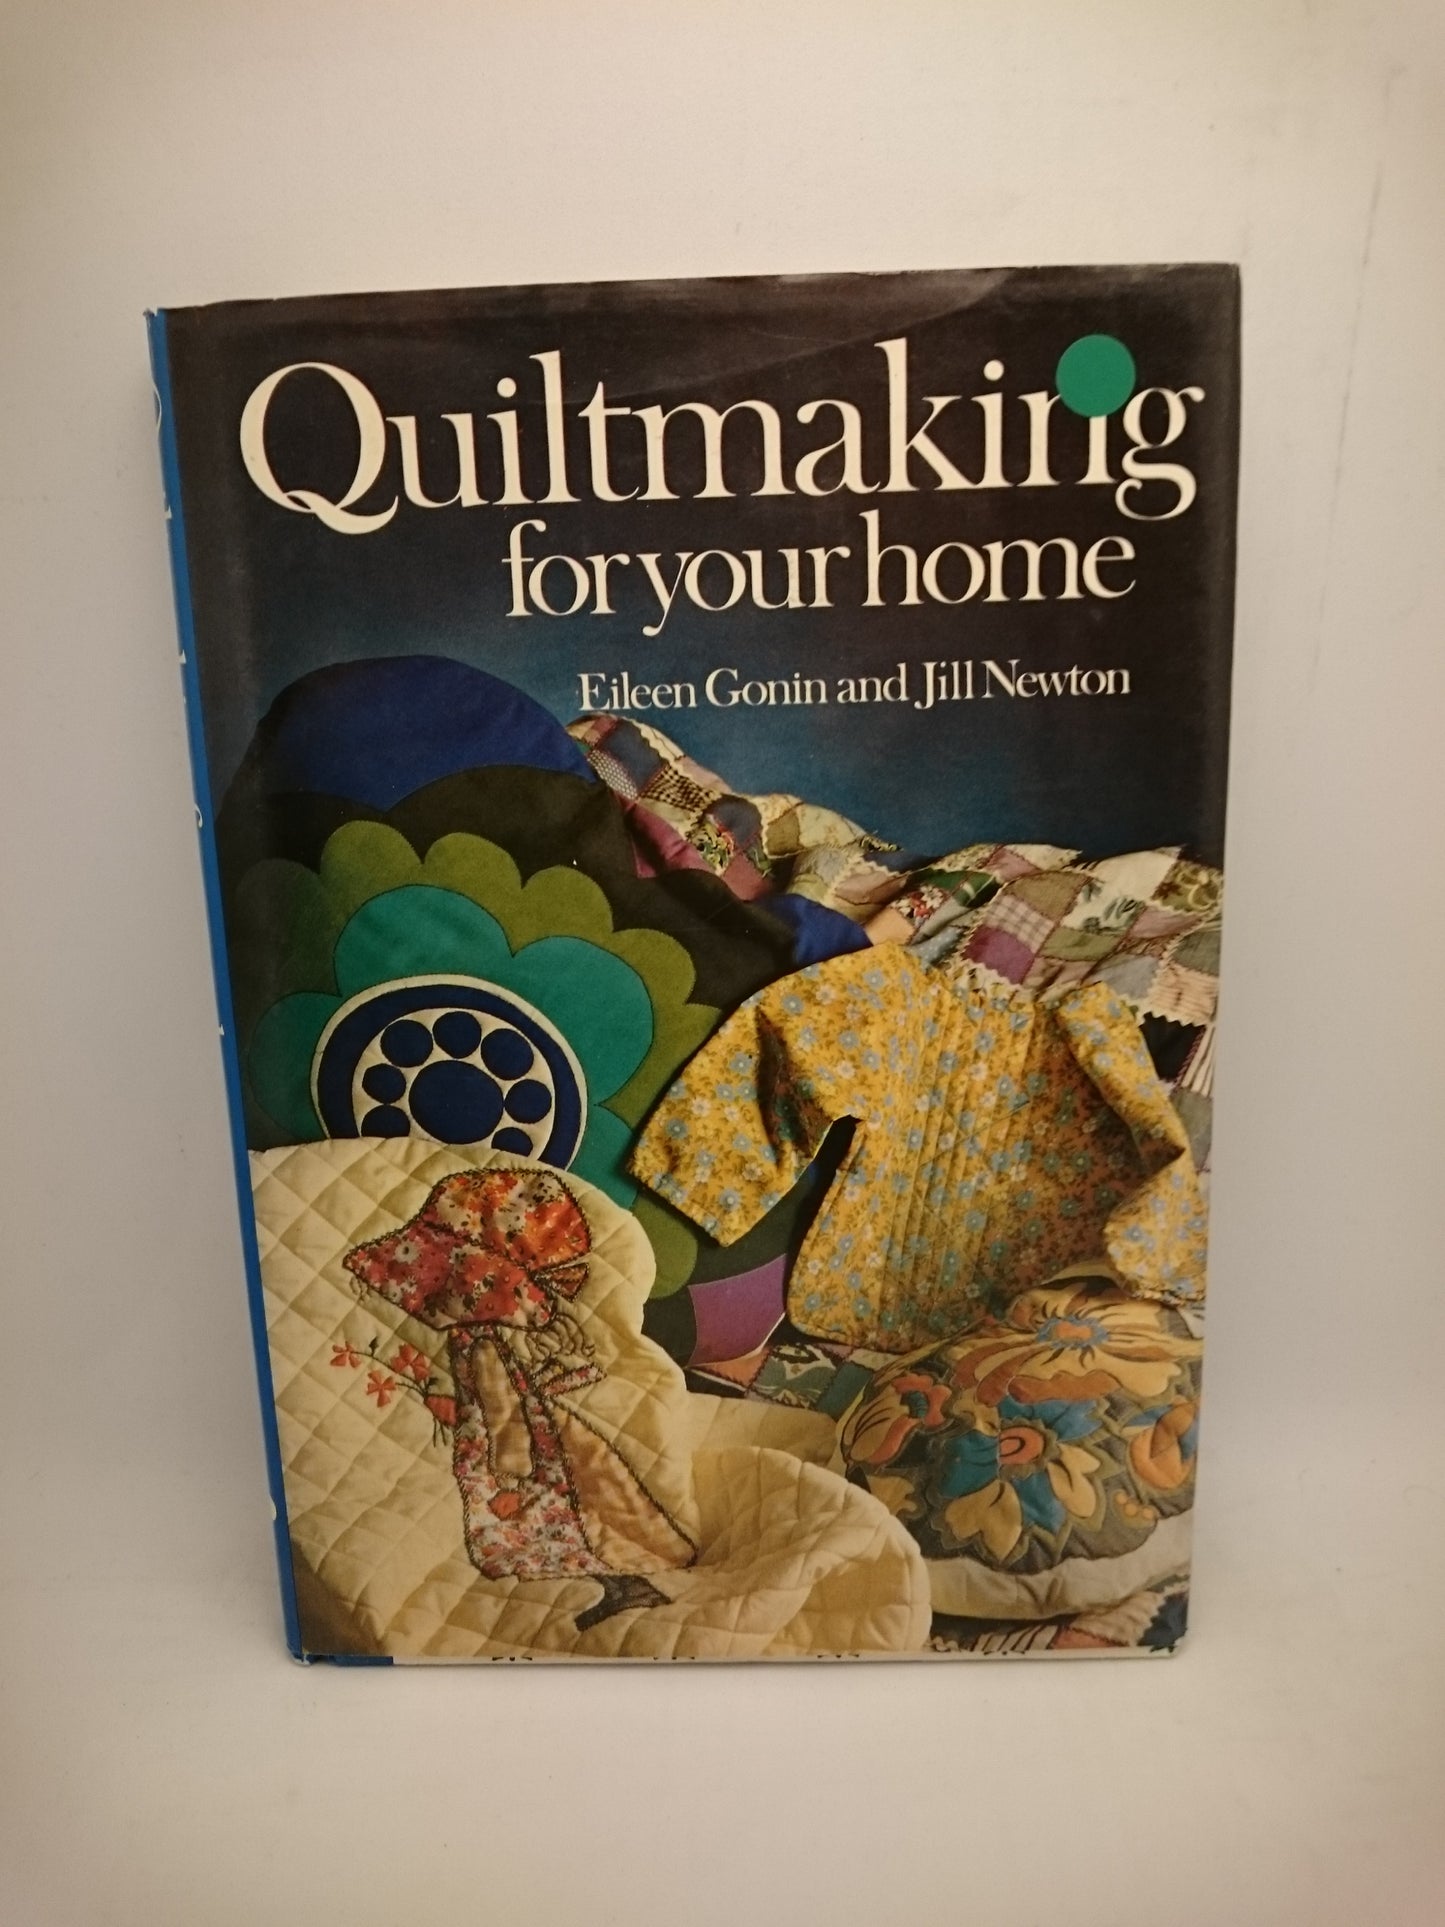 Quilt Making for your home